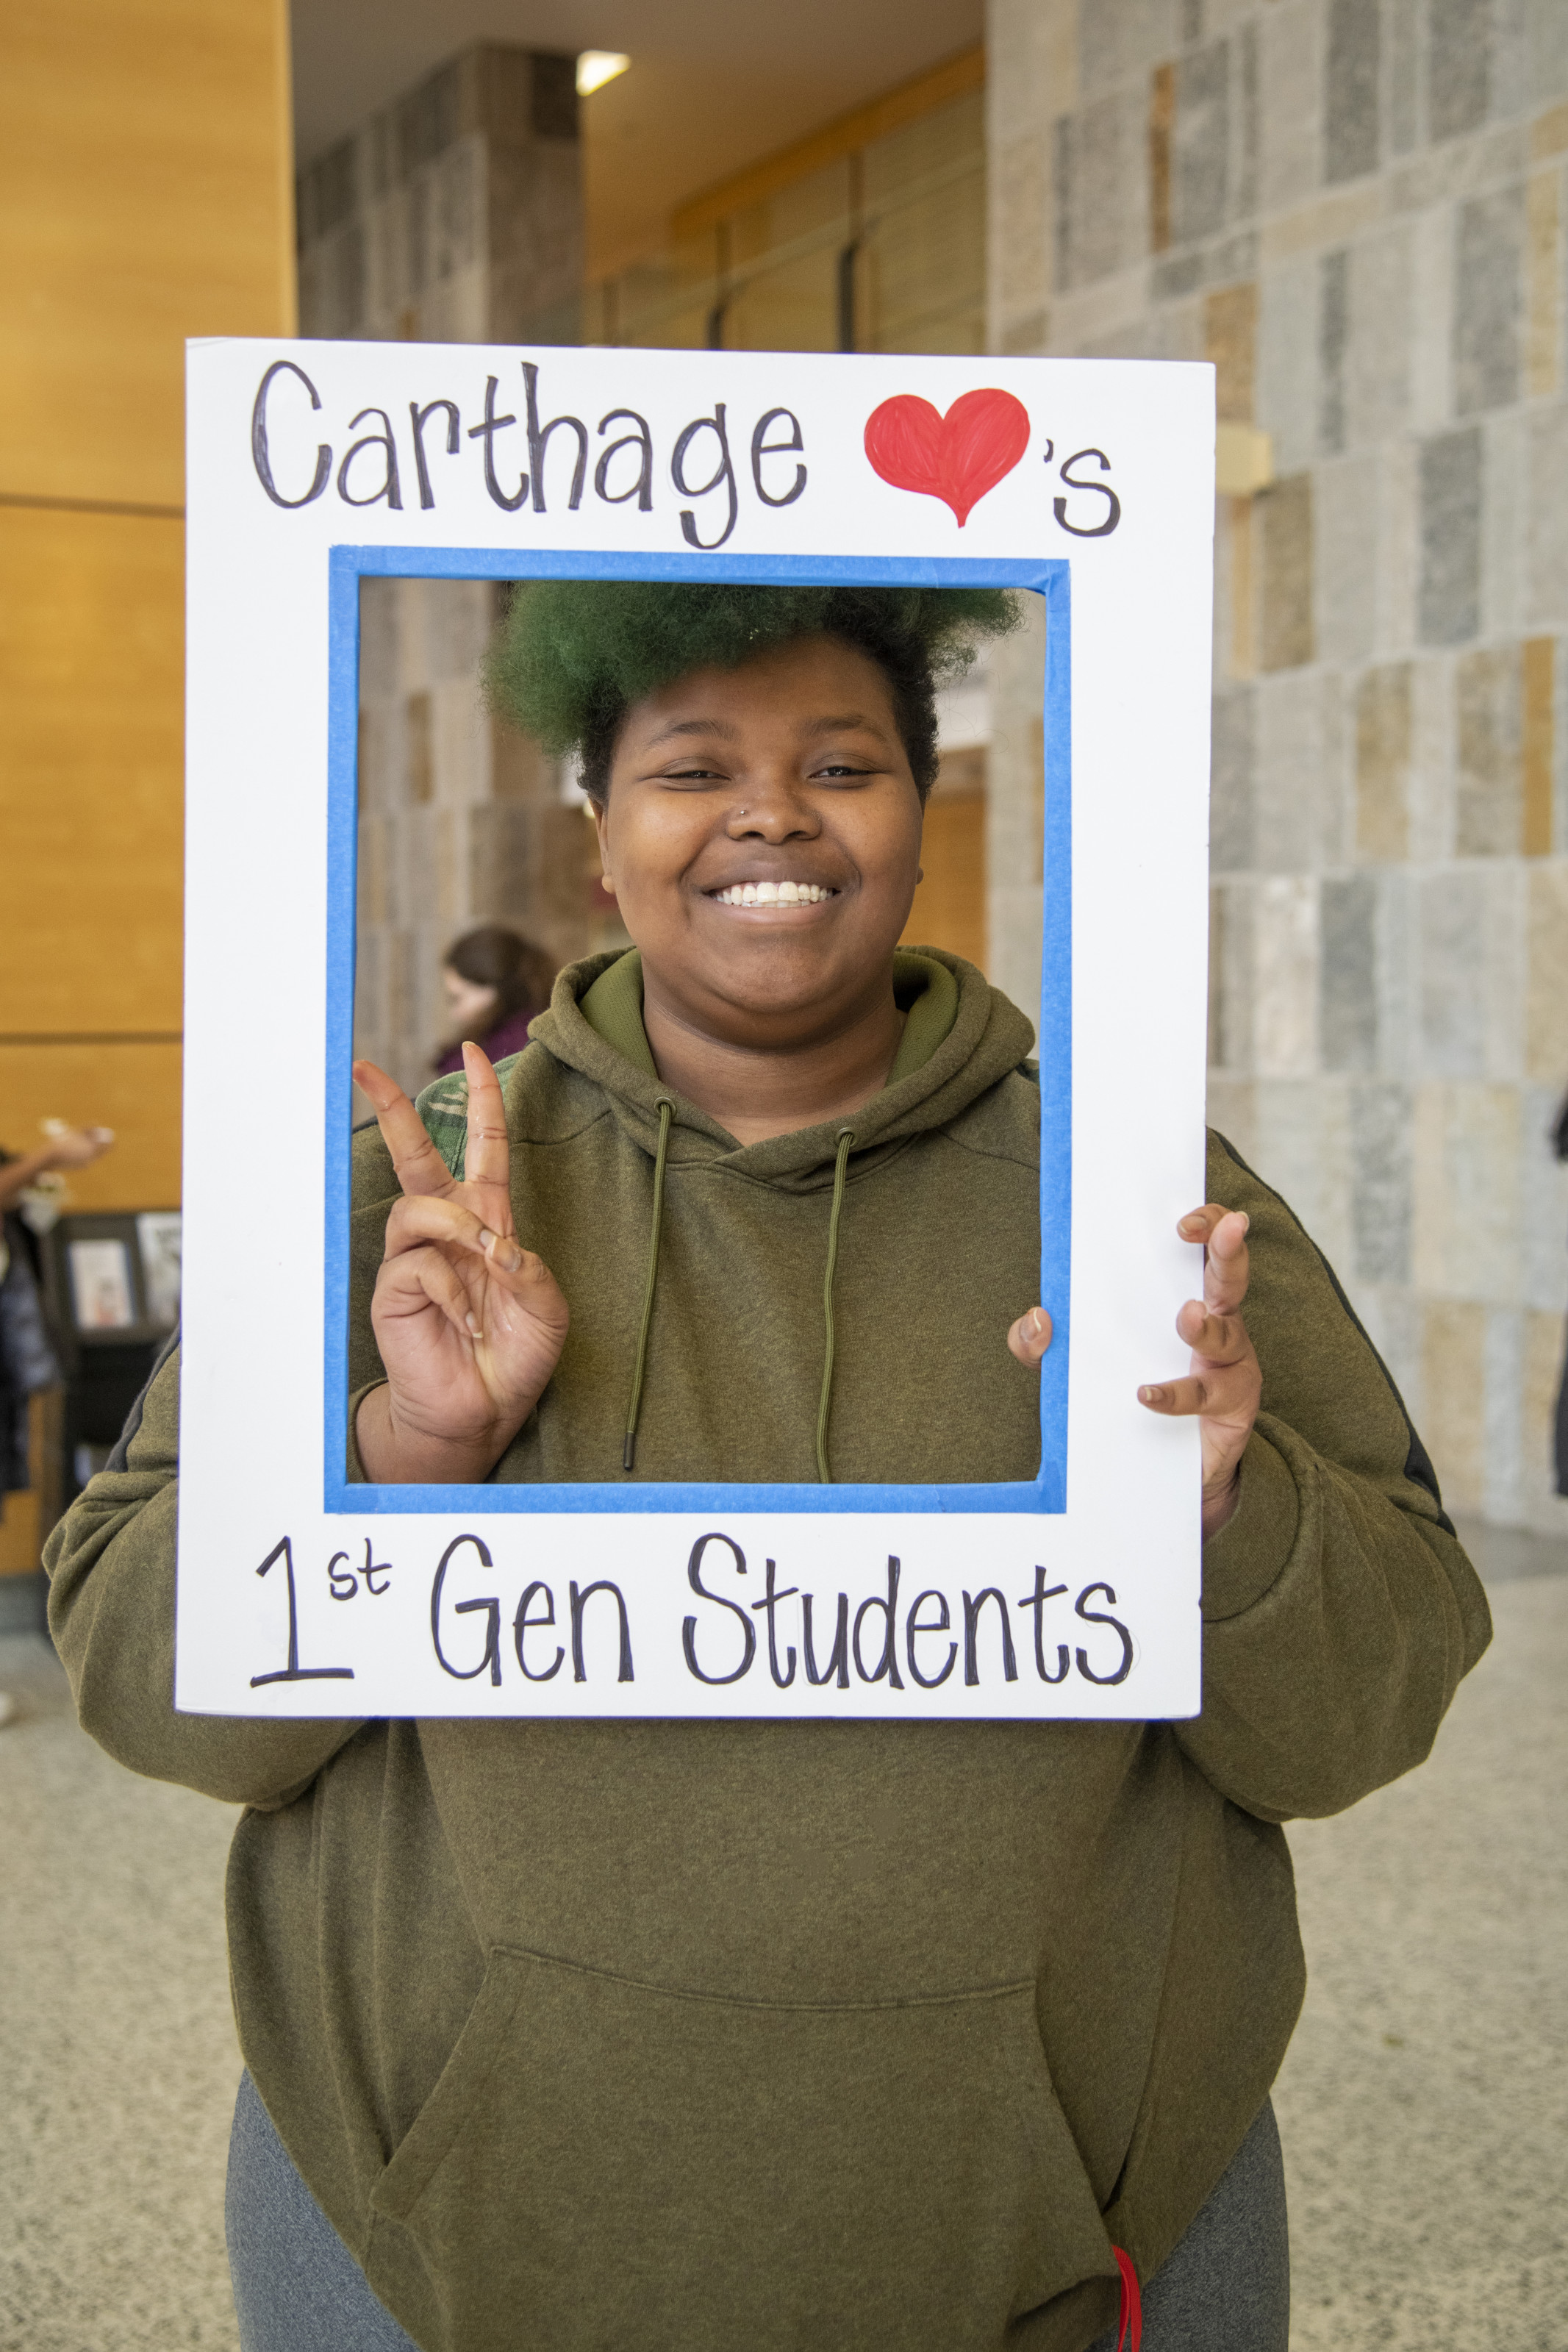 Carthage regularly holds special events to welcome first-generation students.